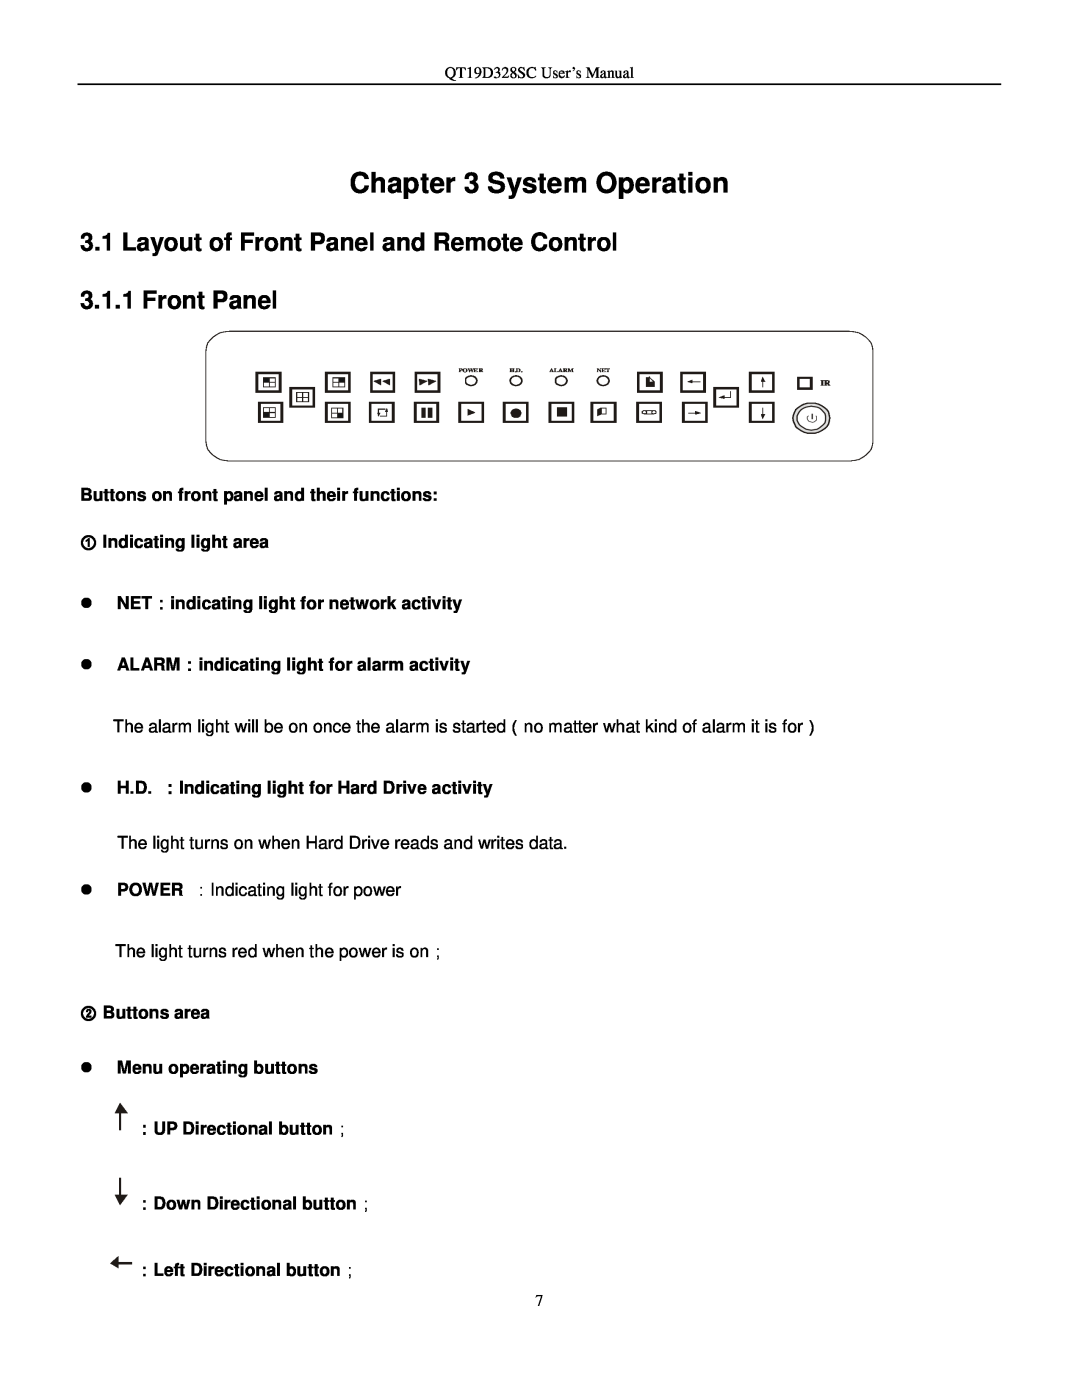 Q-See QT17D324SC user manual System Operation, Layout of Front Panel and Remote Control 3.1.1 Front Panel 